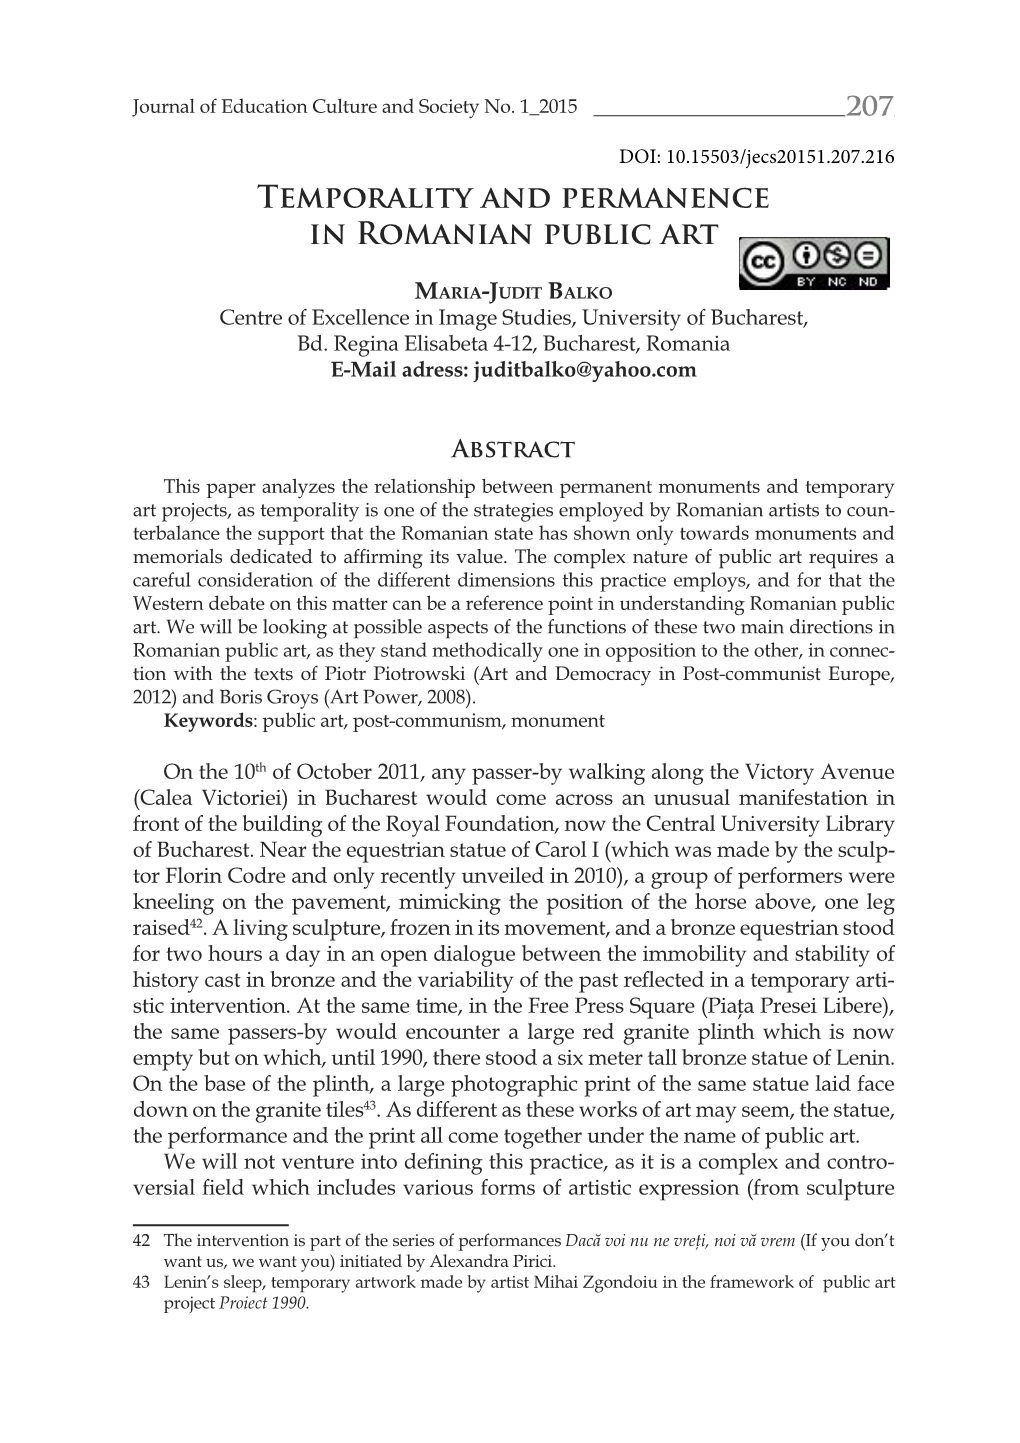 Temporality and Permanence in Romanian Public Art